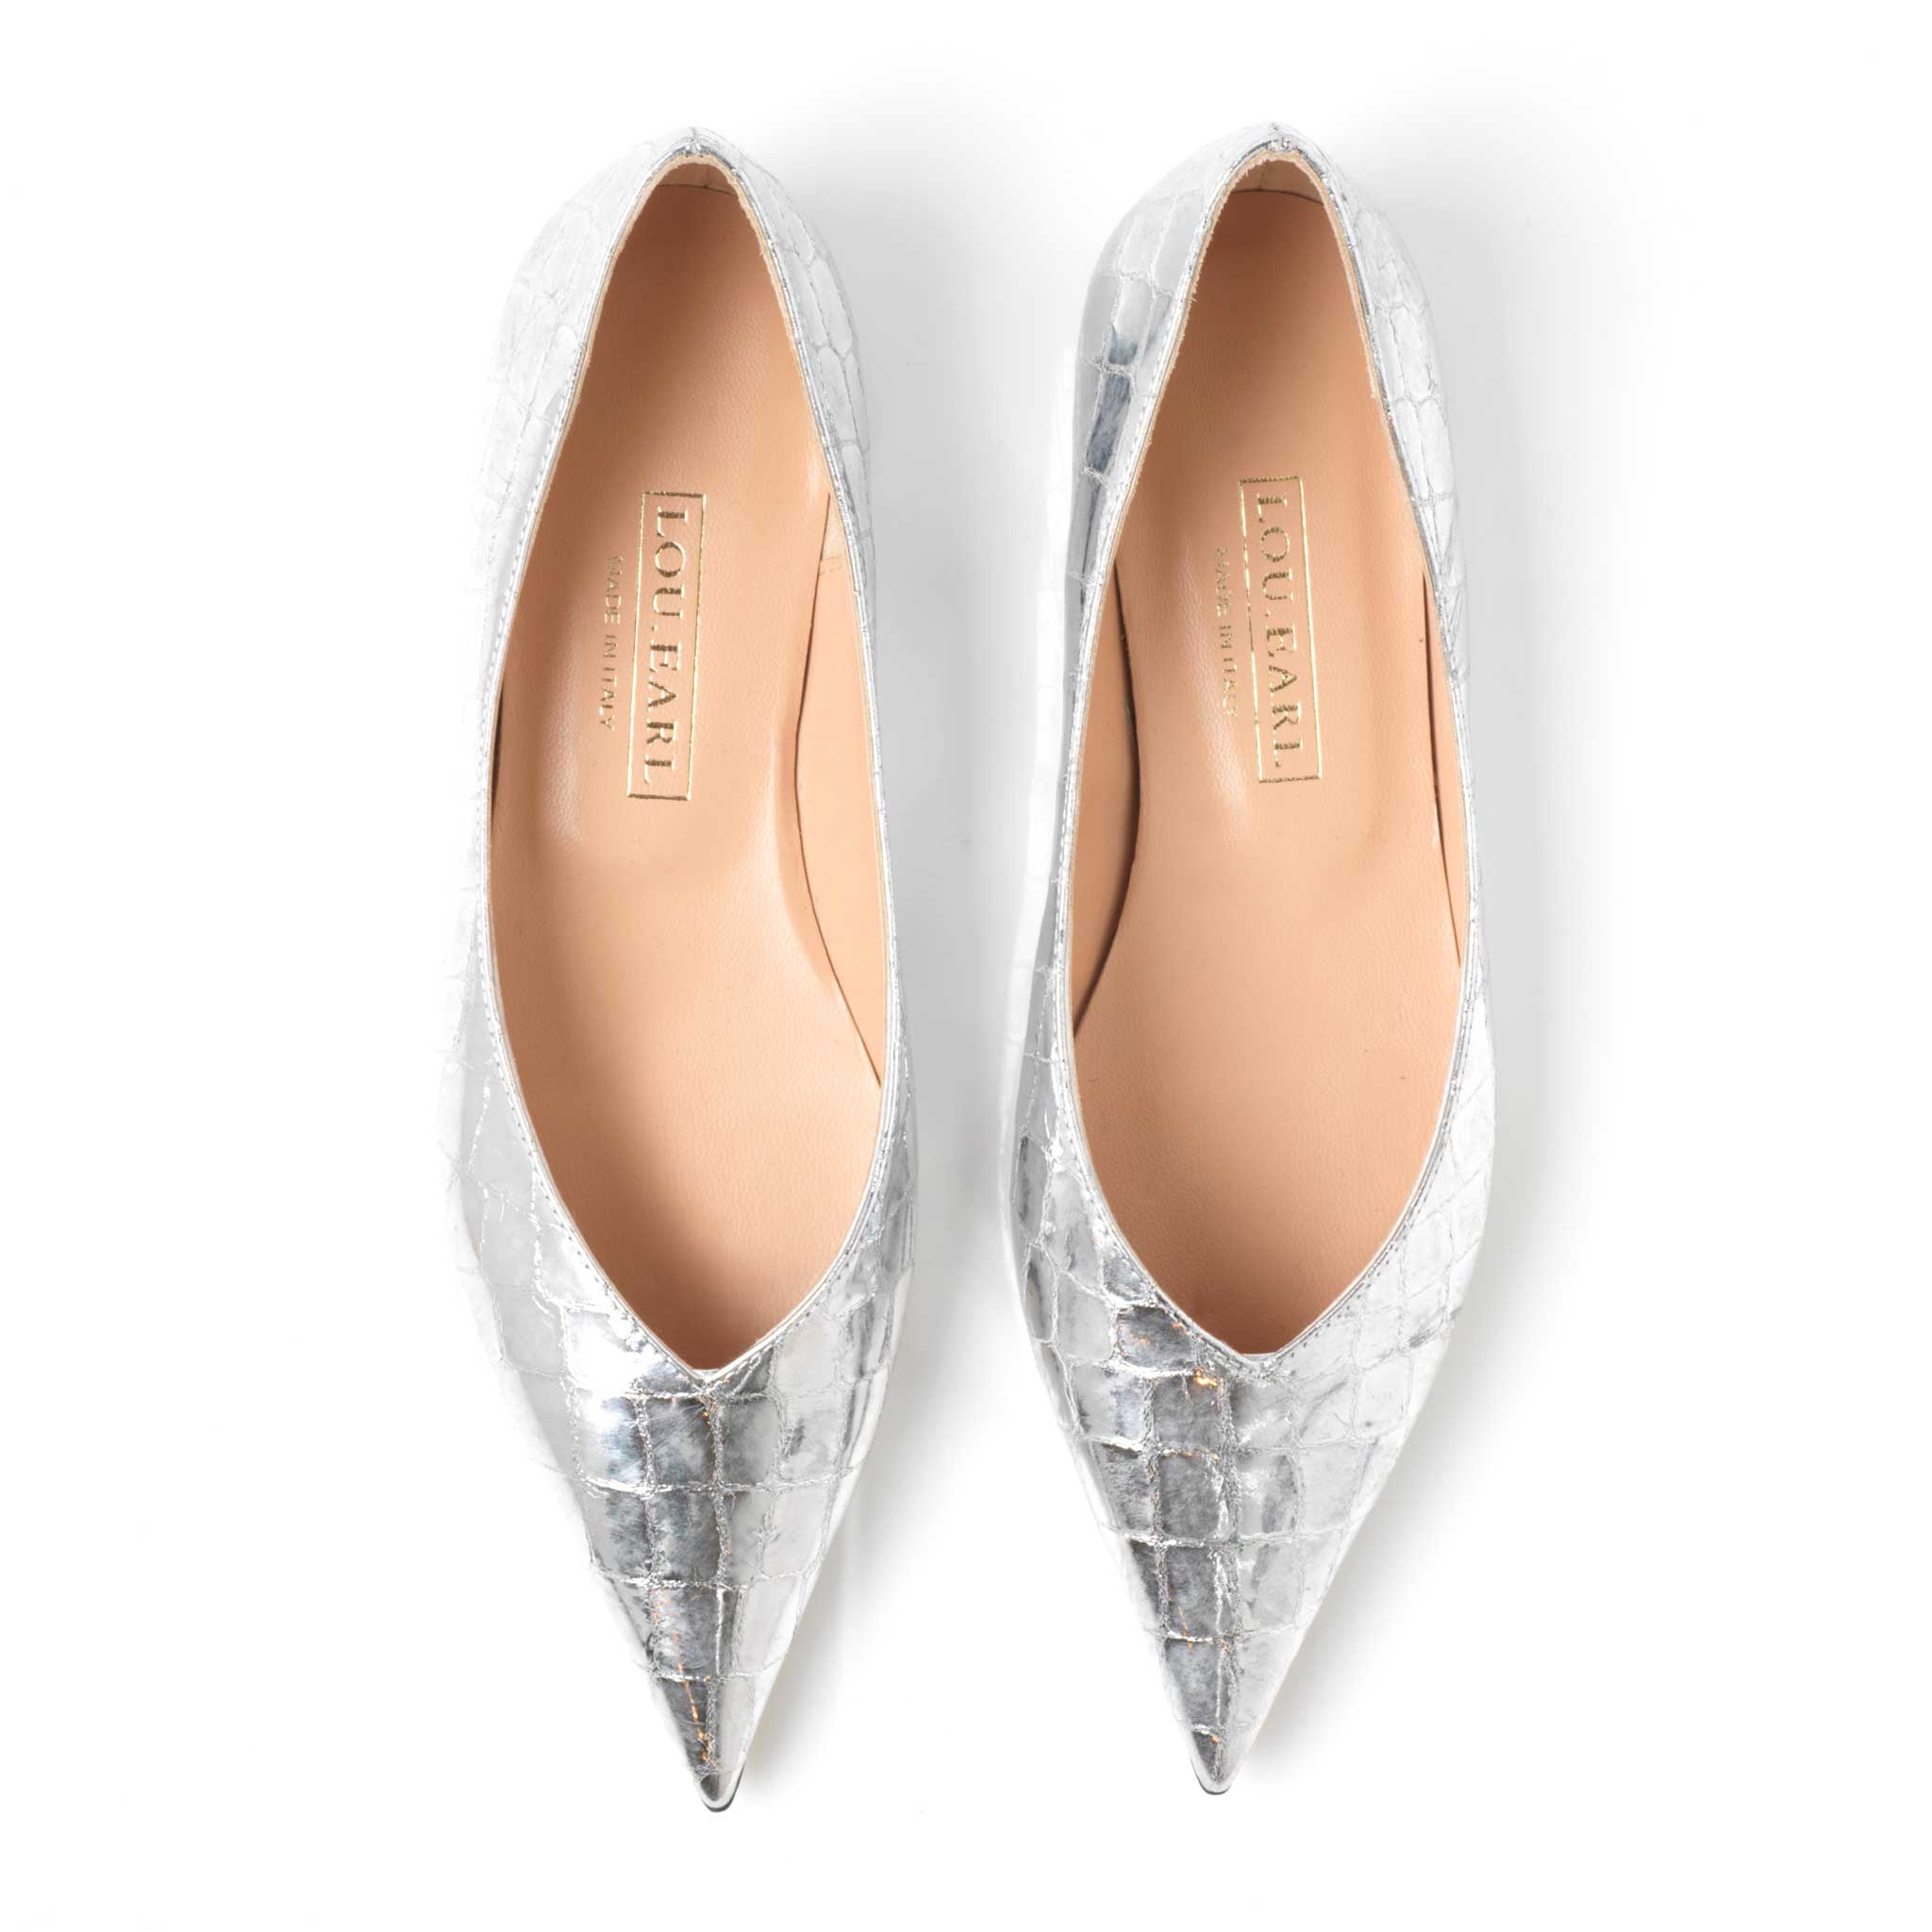 women's silver metallic pointed toe leather flat shoes